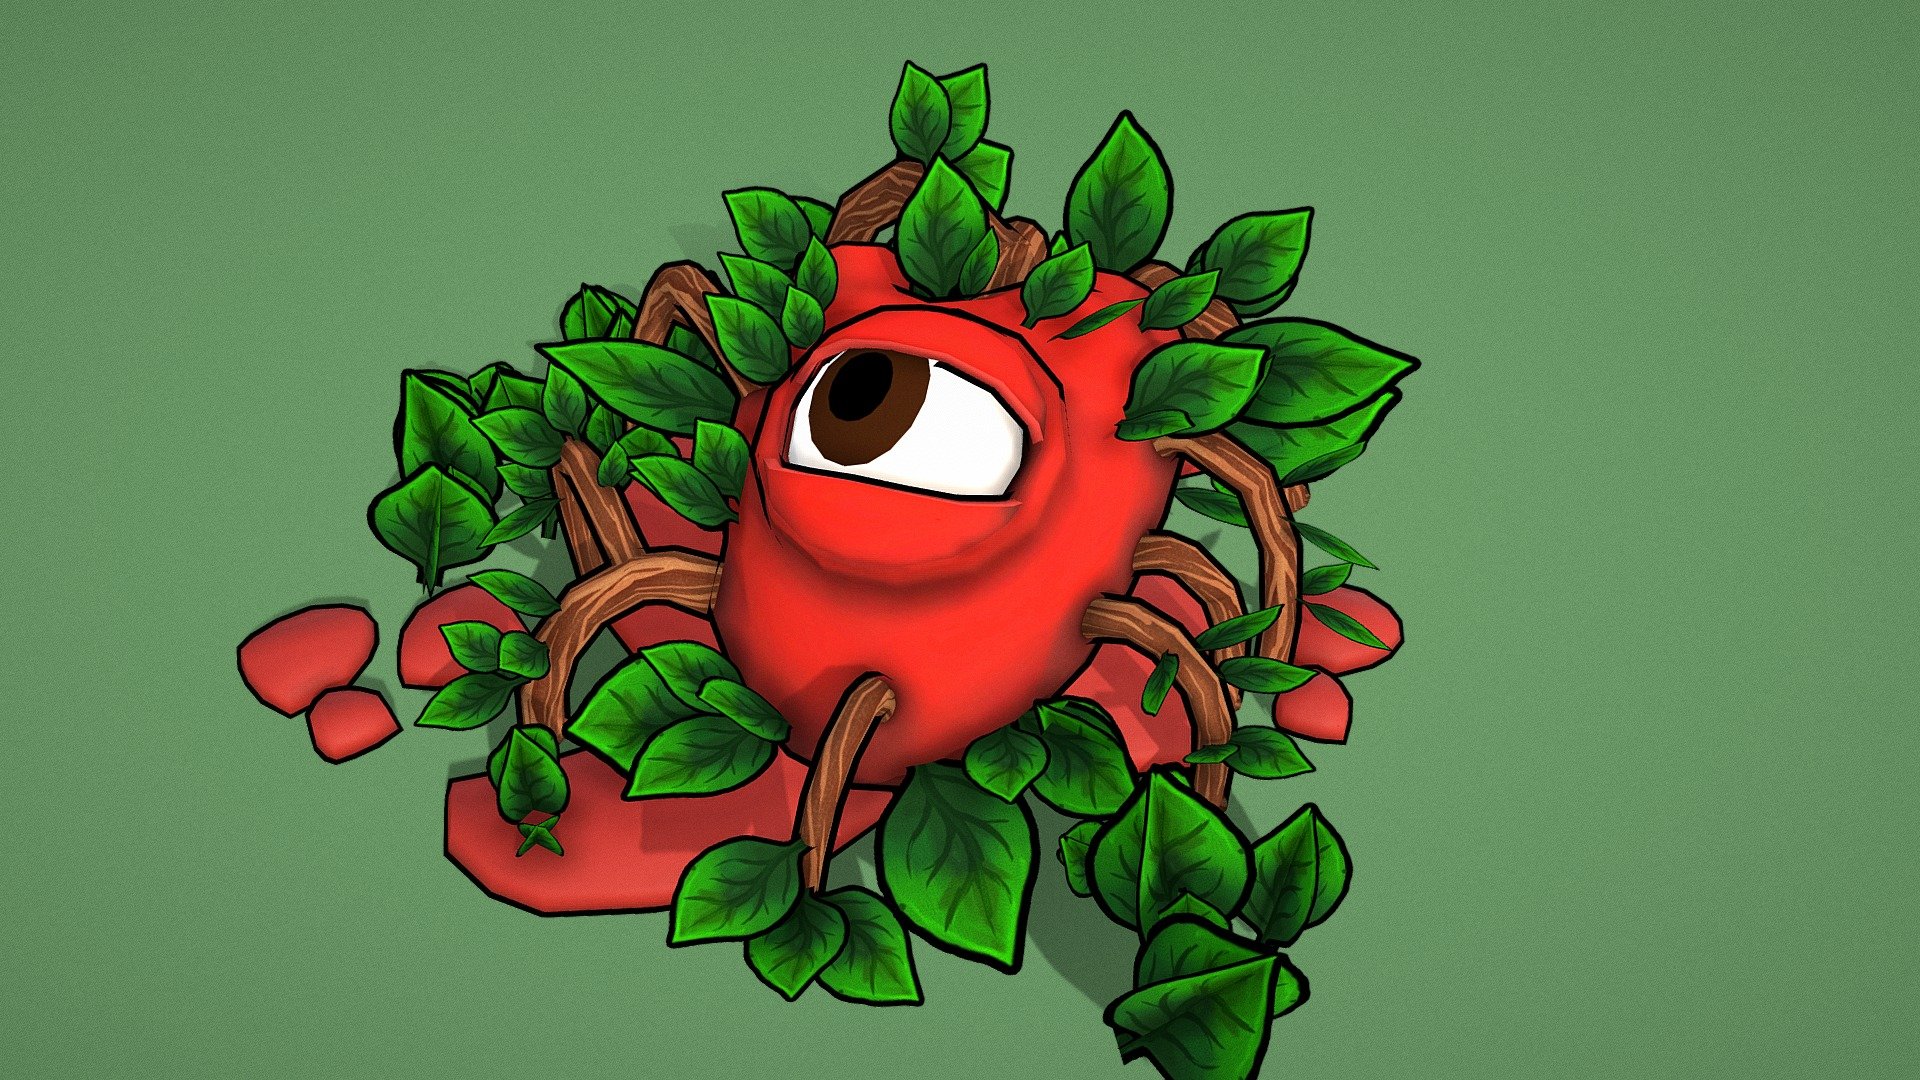 A green cartoony heart with an eye explores its surroundings while beating and giving life to the plants around it 3d model